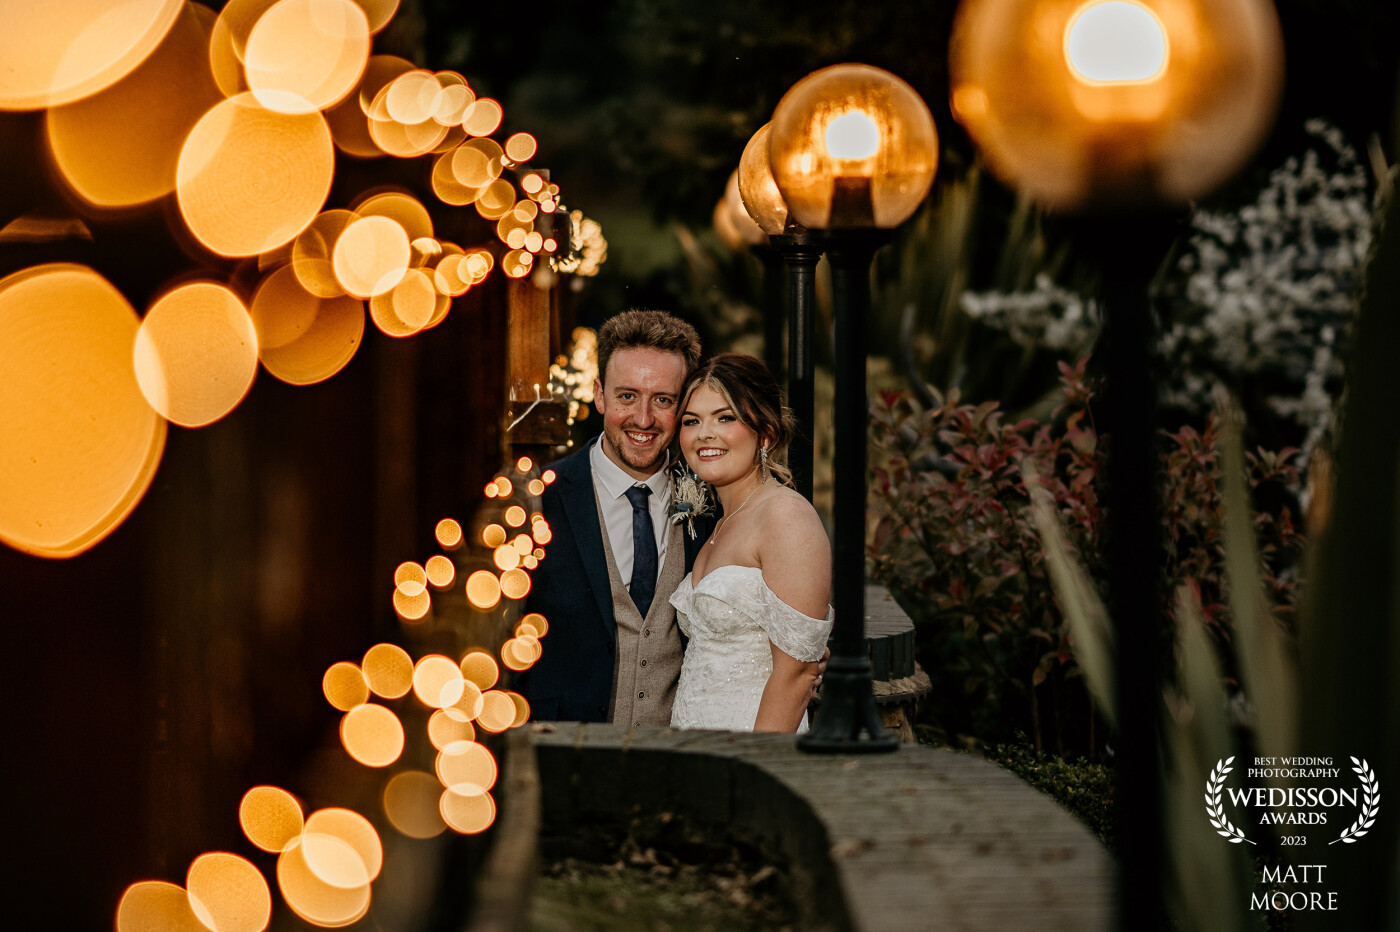 A little creativity, festoon lighting and a bit of bokey, helped this stunning image for Nathan and Megan at the White Hart in Derbyshire